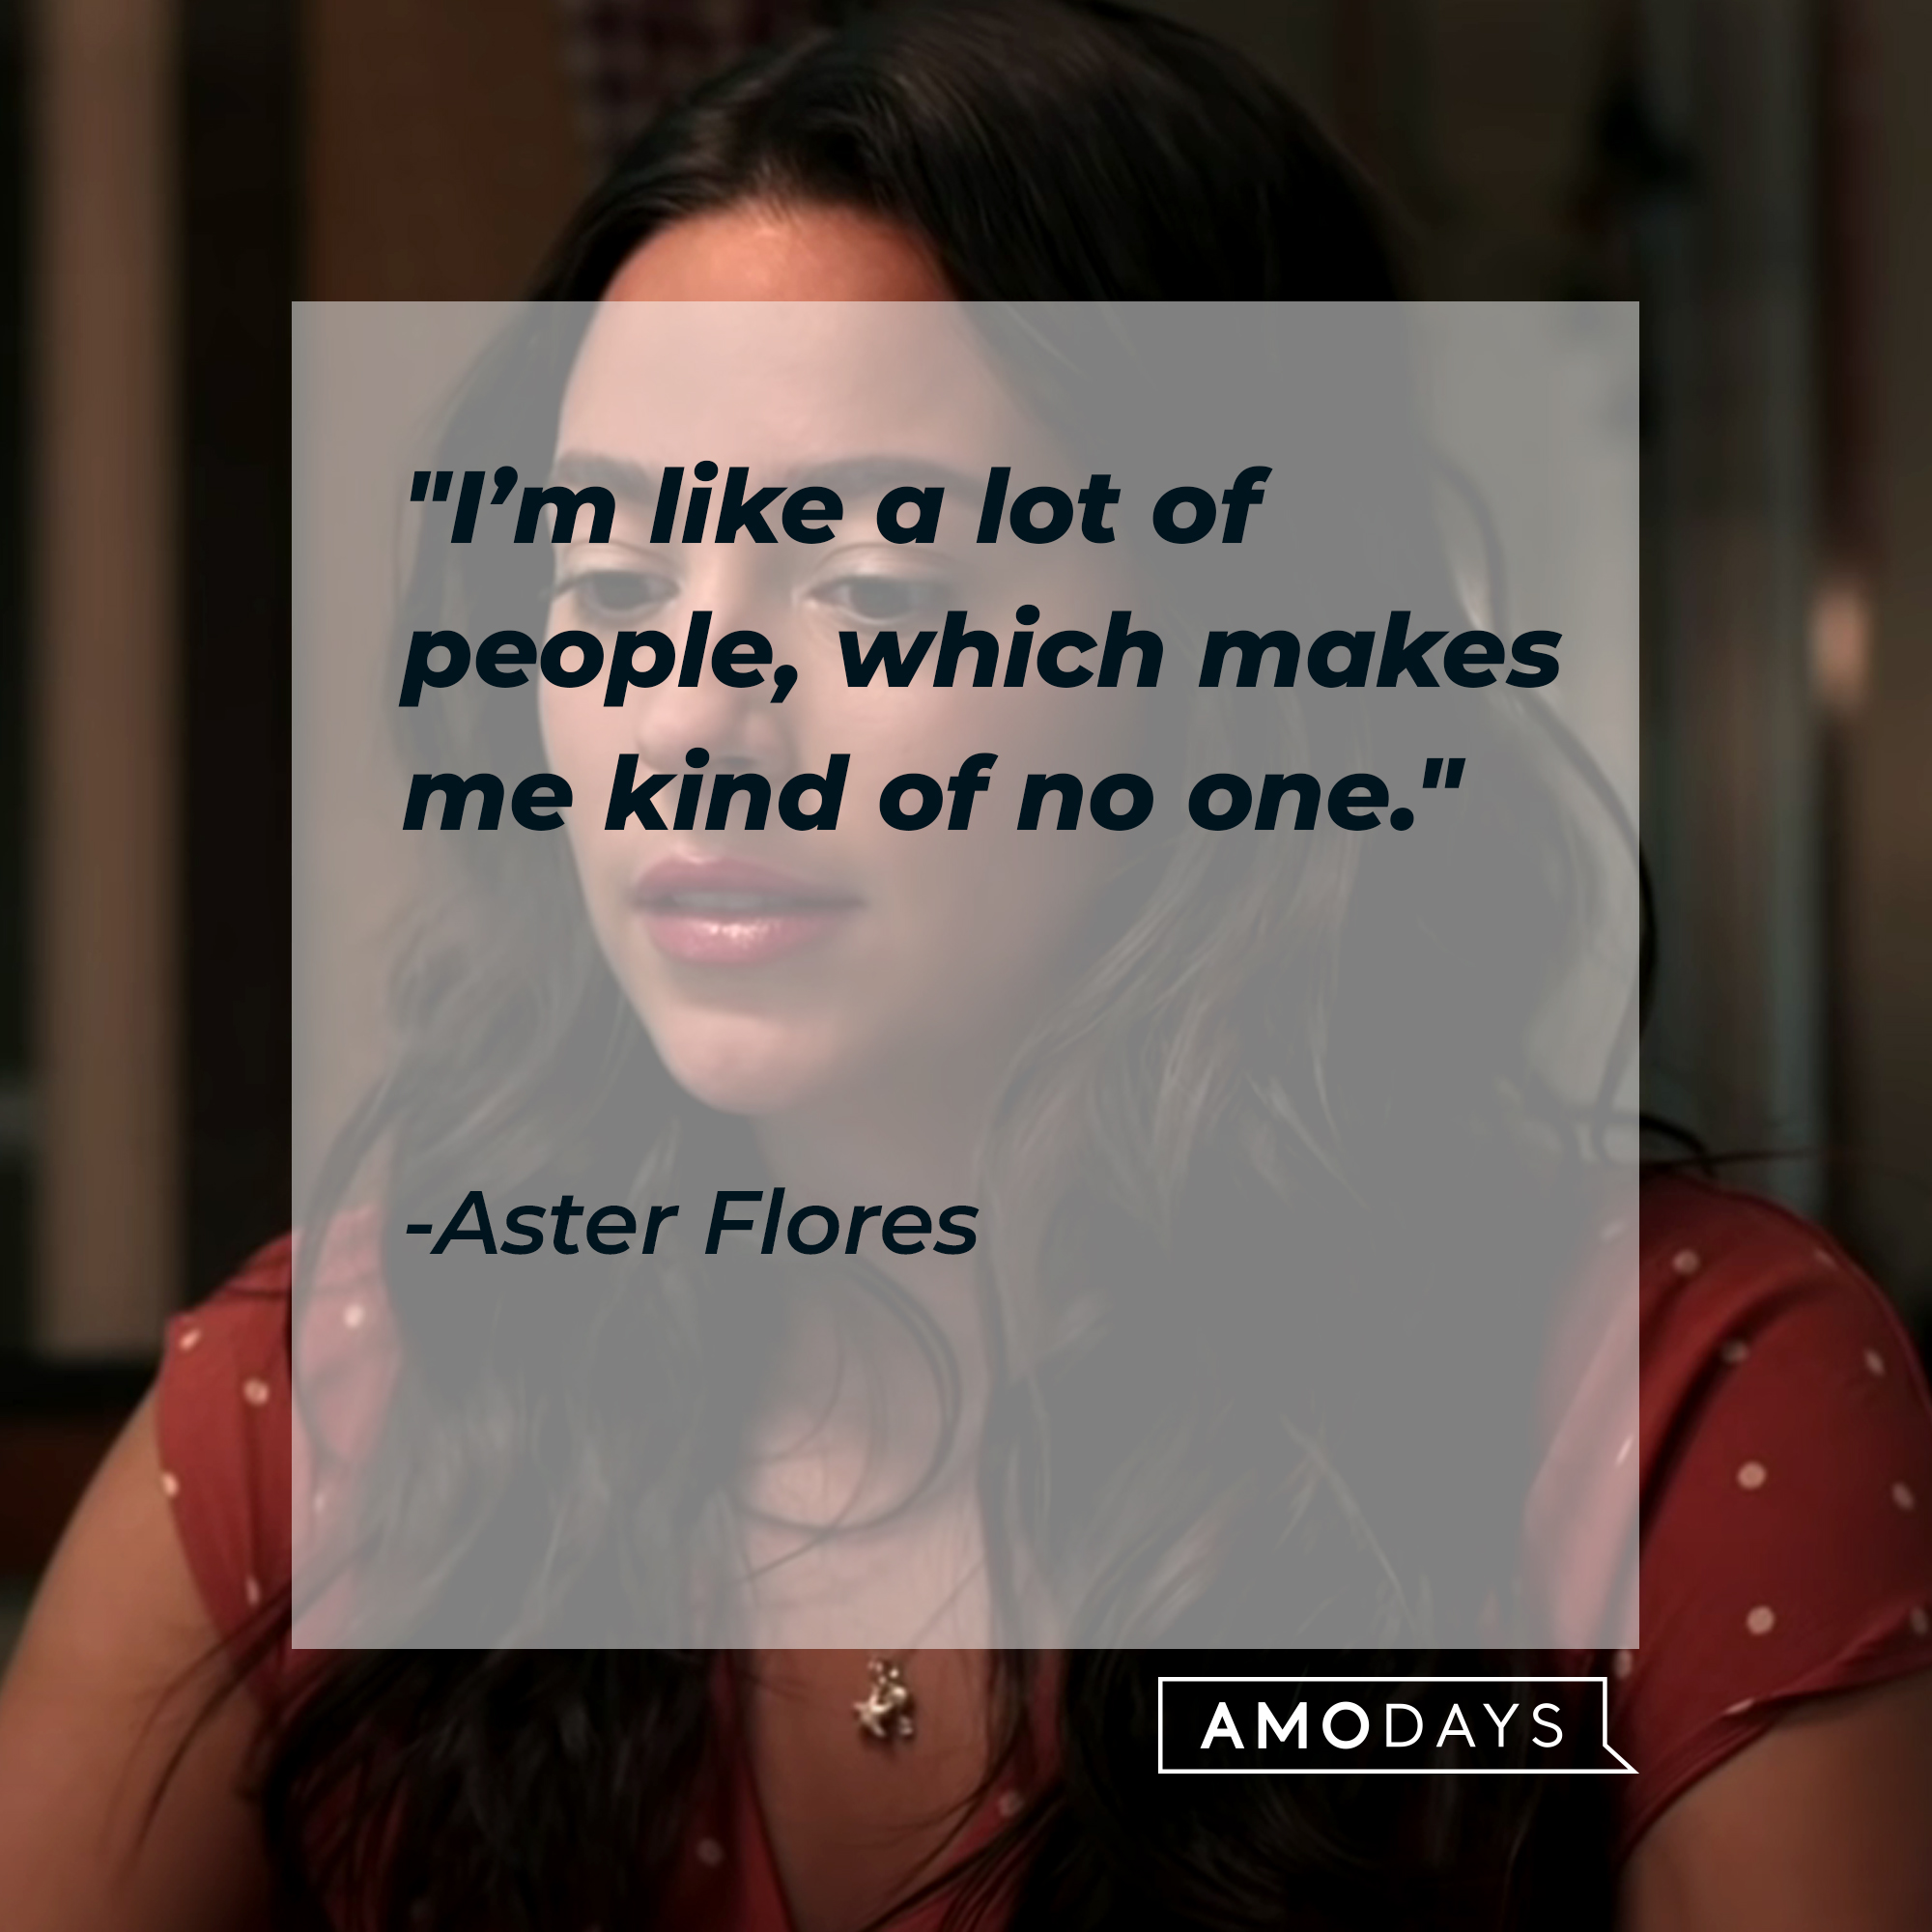 Aster Flores's quote, "I'm like a lot of people, which makes me kind of no one." | Image: youtube.com/Netflix